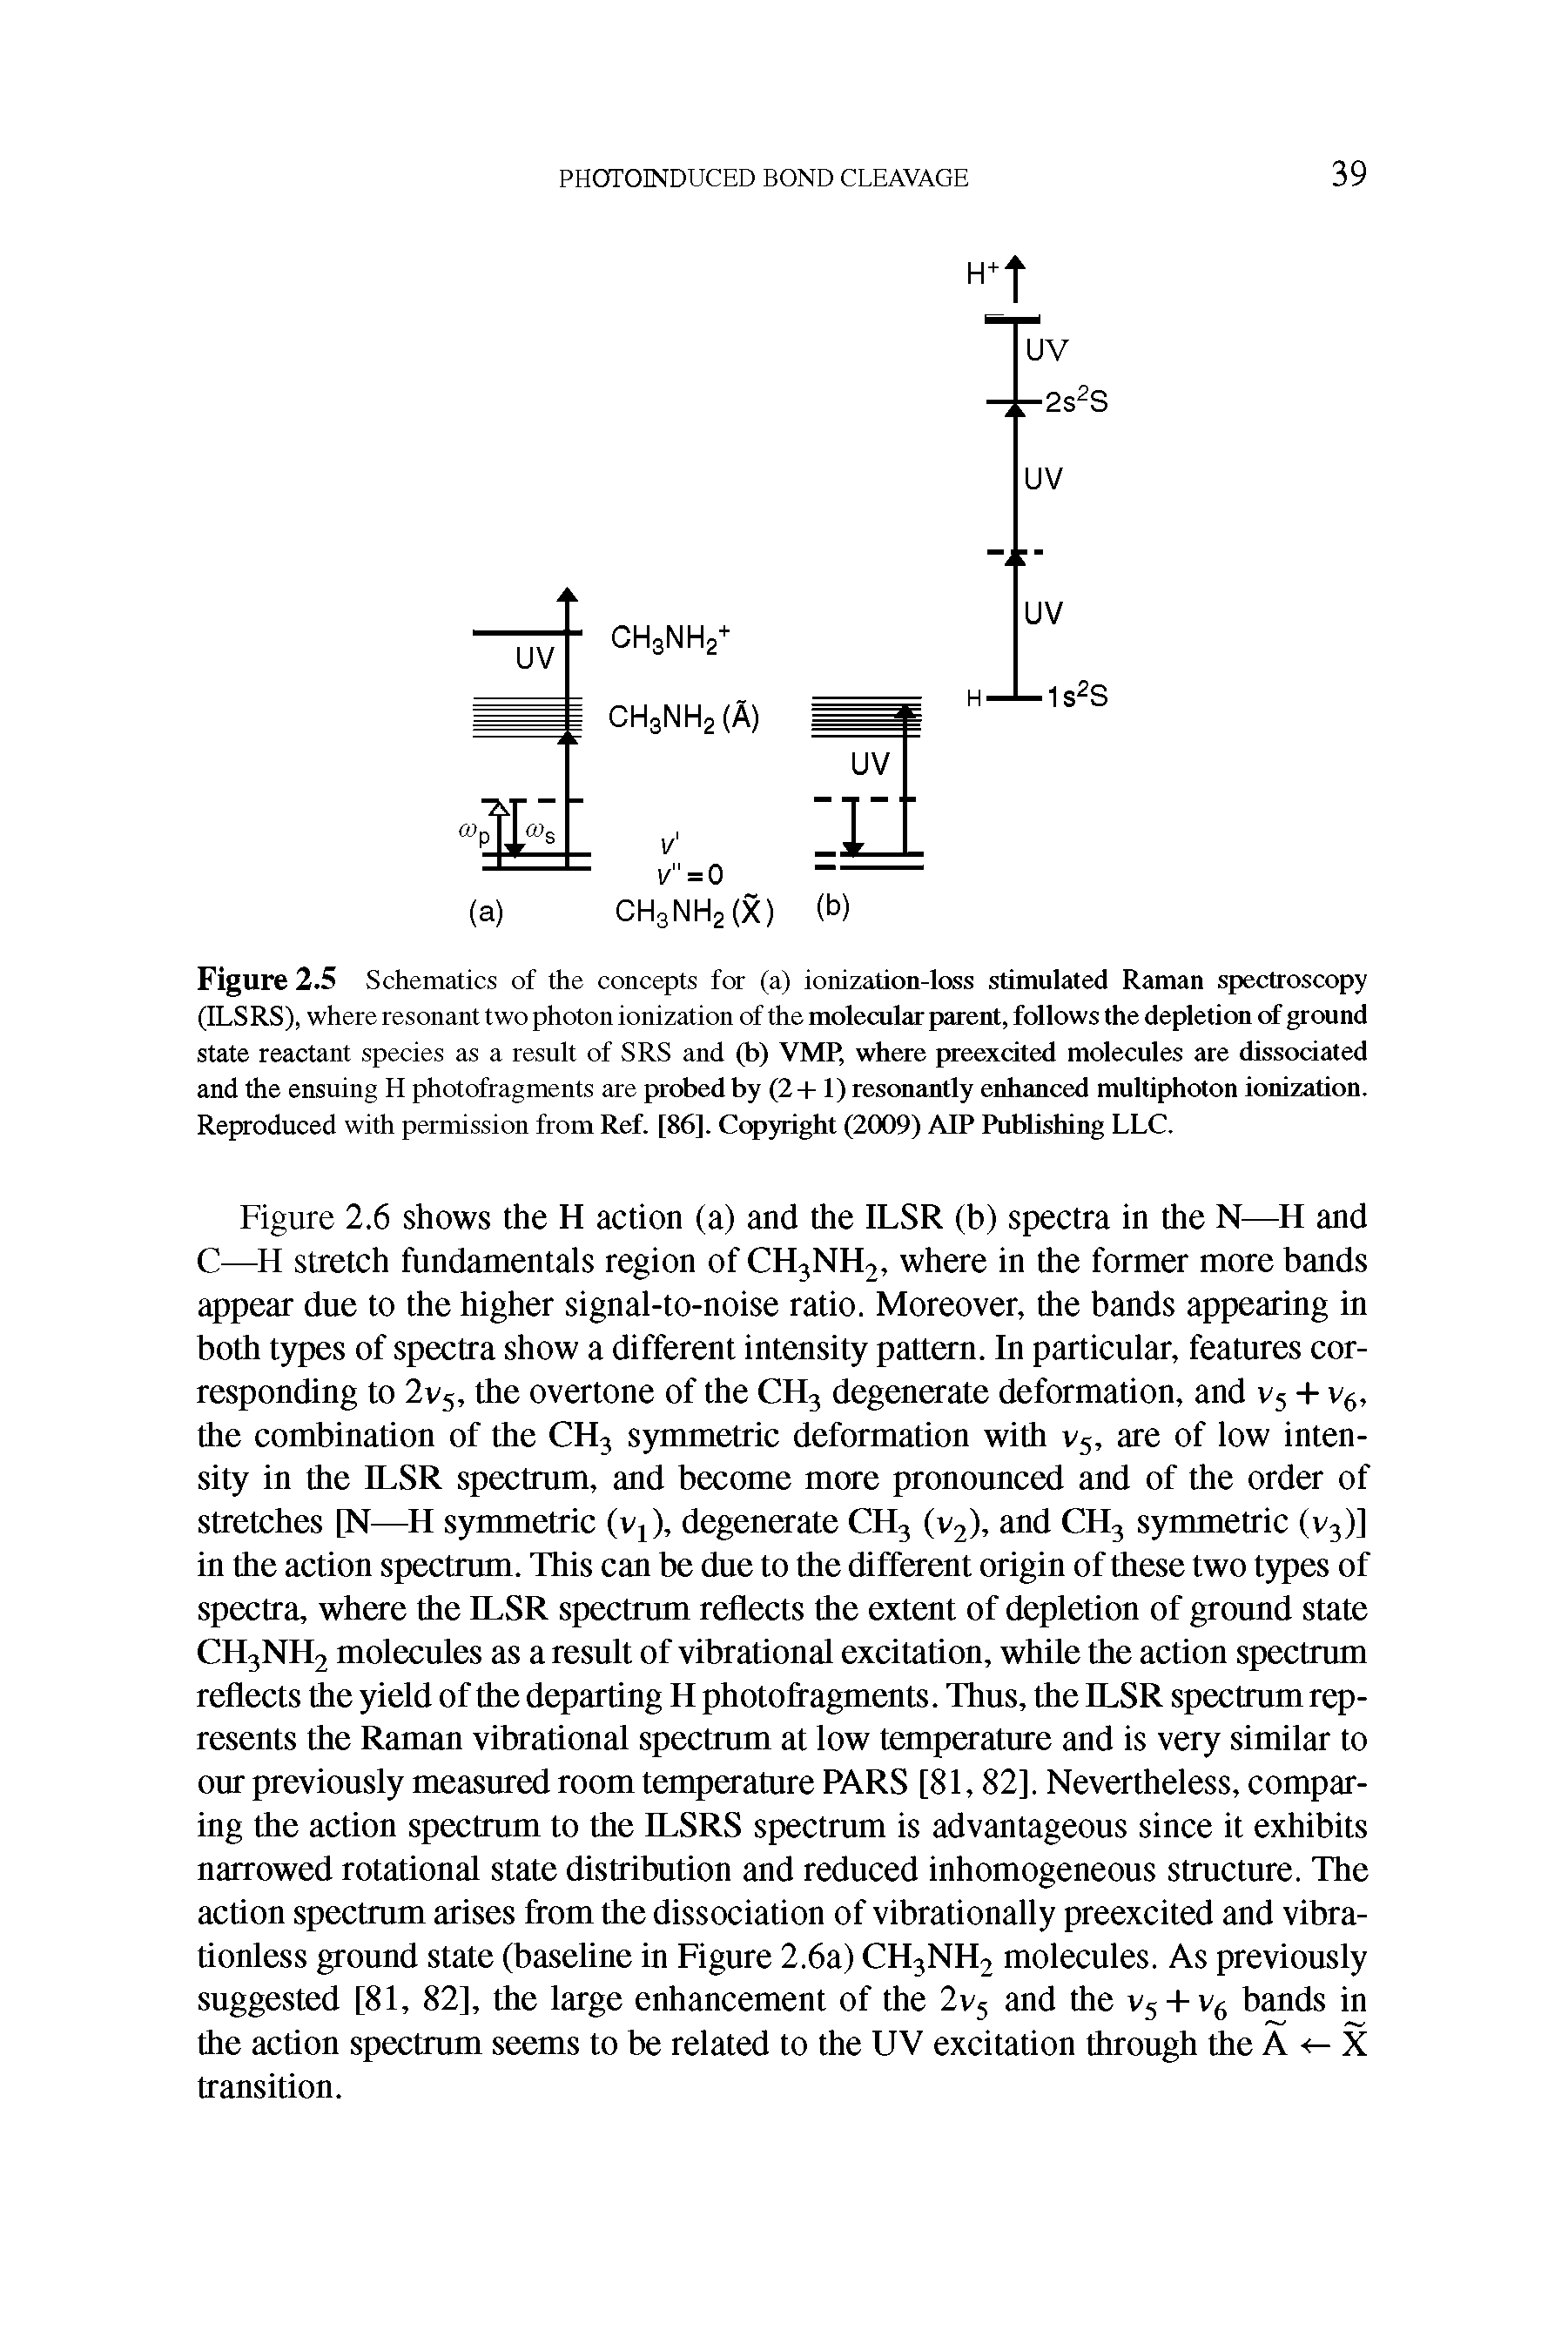 Figure 2.5 Schematics of the concepts for (a) ionization-loss stimulated Raman spectroscopy (ILSRS), where resonant two photon ionization of the molecular parent, follows the depletion of ground state reactant species as a result of SRS and (b) VMP, where preexcited molecules are dissociated and the ensuing H photofragments are probed by (2 -I-1) resonantly enhanced multiphoton ionization. Reproduced with permission from Ref. [86]. Copyright (2009) AIP Publishing LLC.